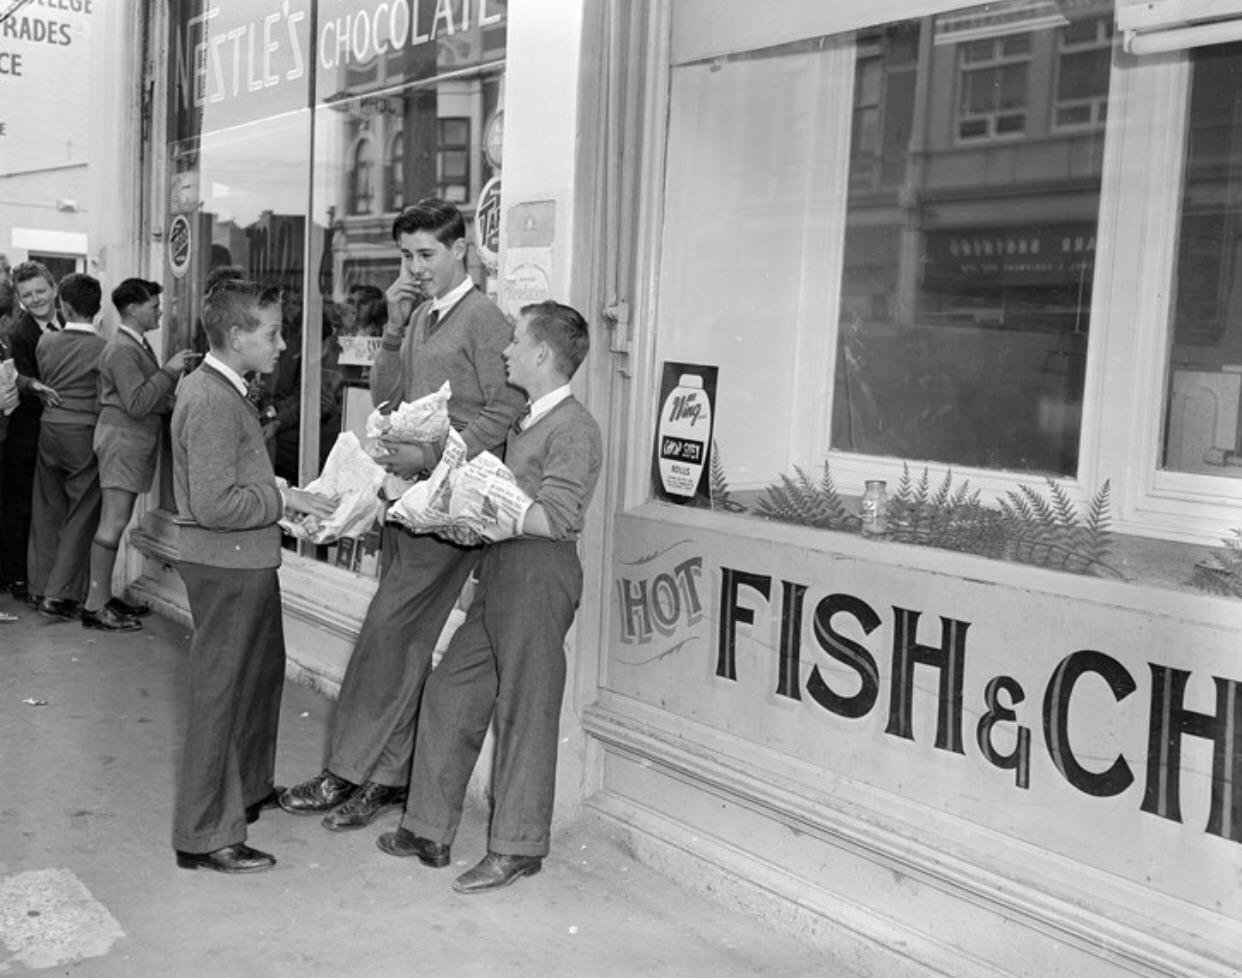 Kew schoolboys outside fish and chips shop. 1959. Photo Source – Museum Victoria